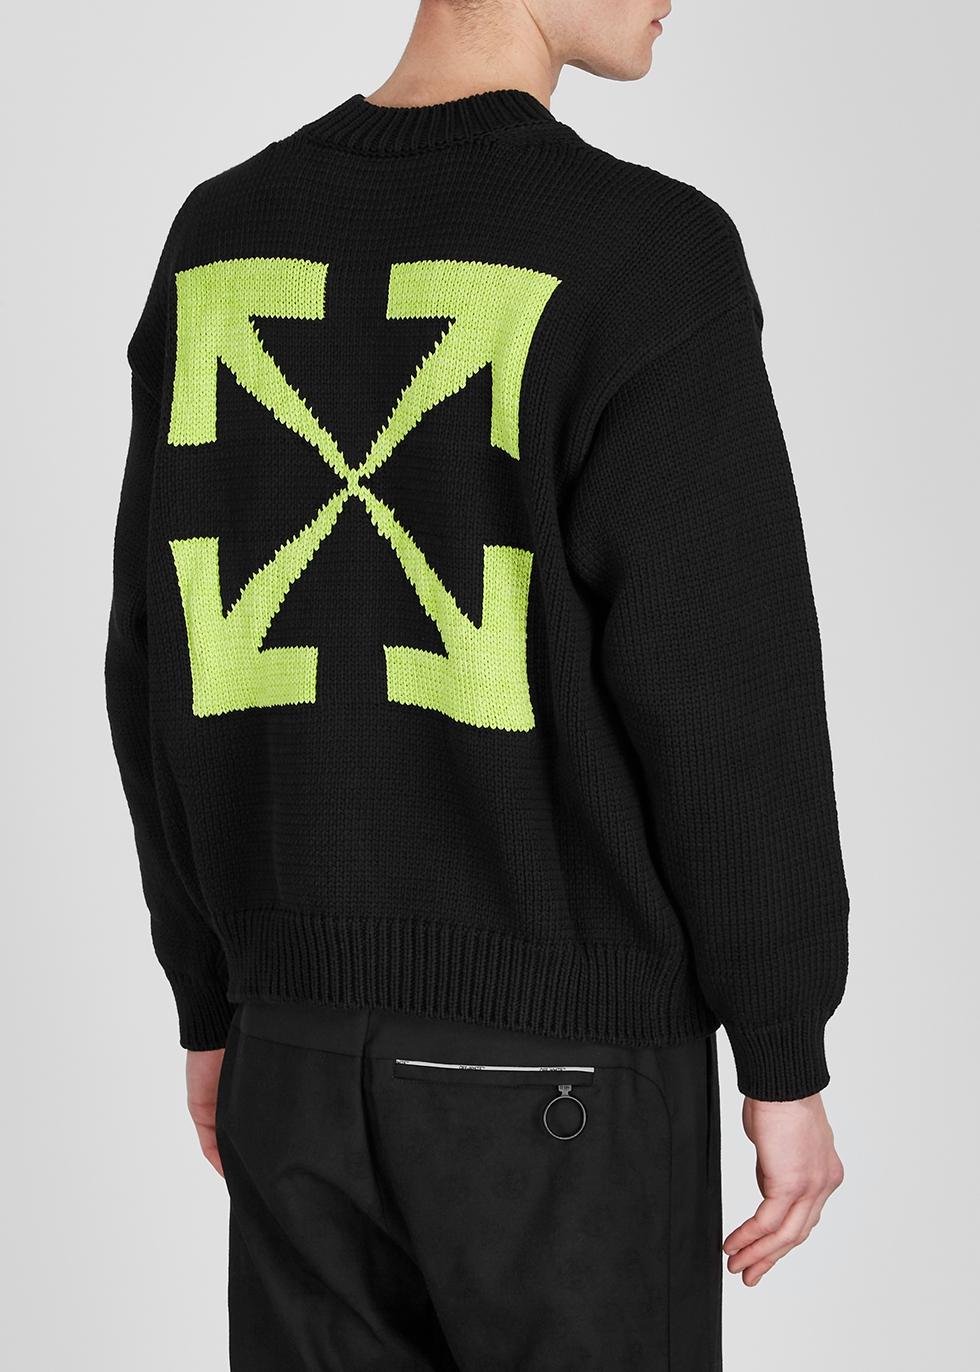 Off-White c/o Virgil Abloh Harry The Bunny Intarsia Knit Jumper in  Black/Green (Black) for Men - Save 79% - Lyst